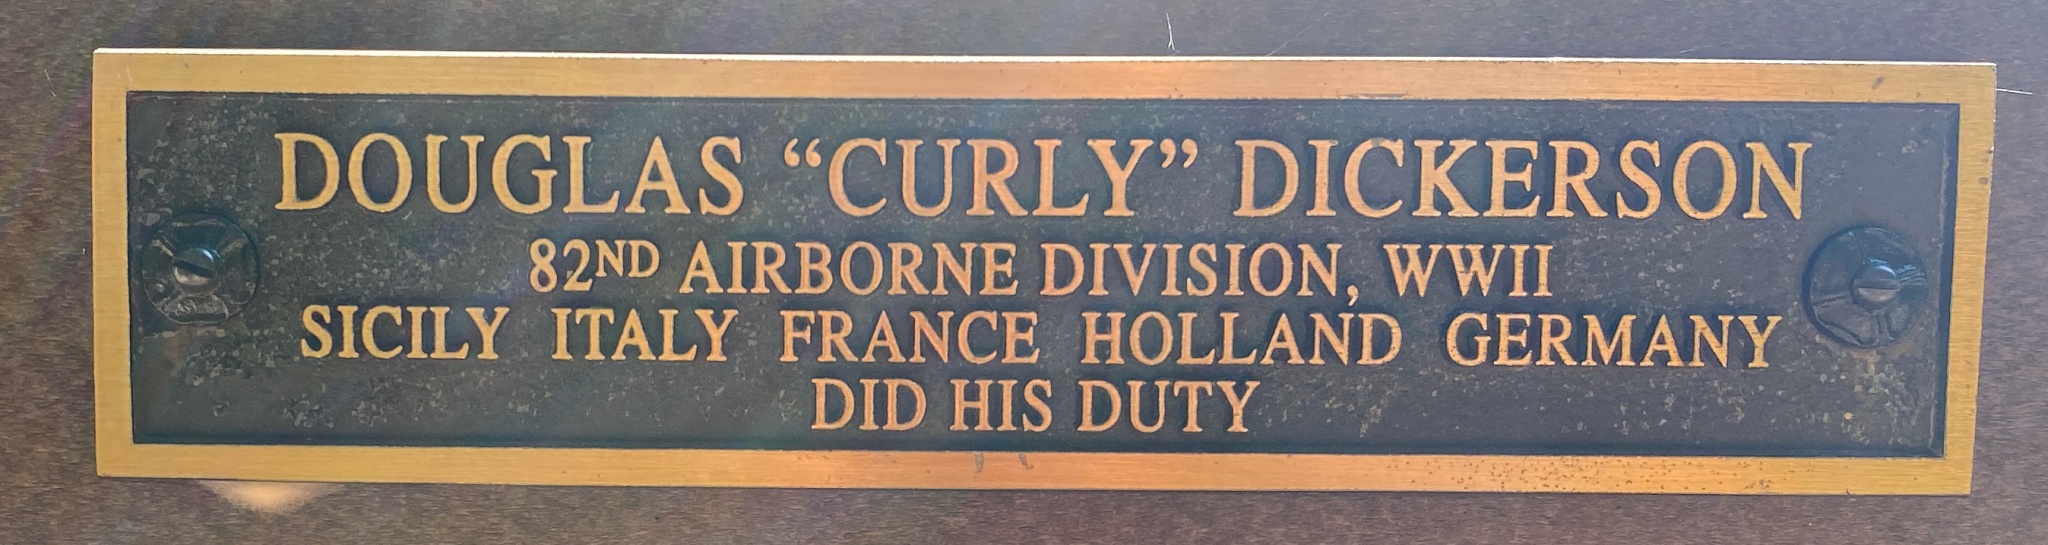 DOUGLAS “CURLY” DICKERSON 82nd AIRBORNE DIVISION, WWII SICILY ITALY FRANCE HOLLAND GERMANY DID HIS DUTY